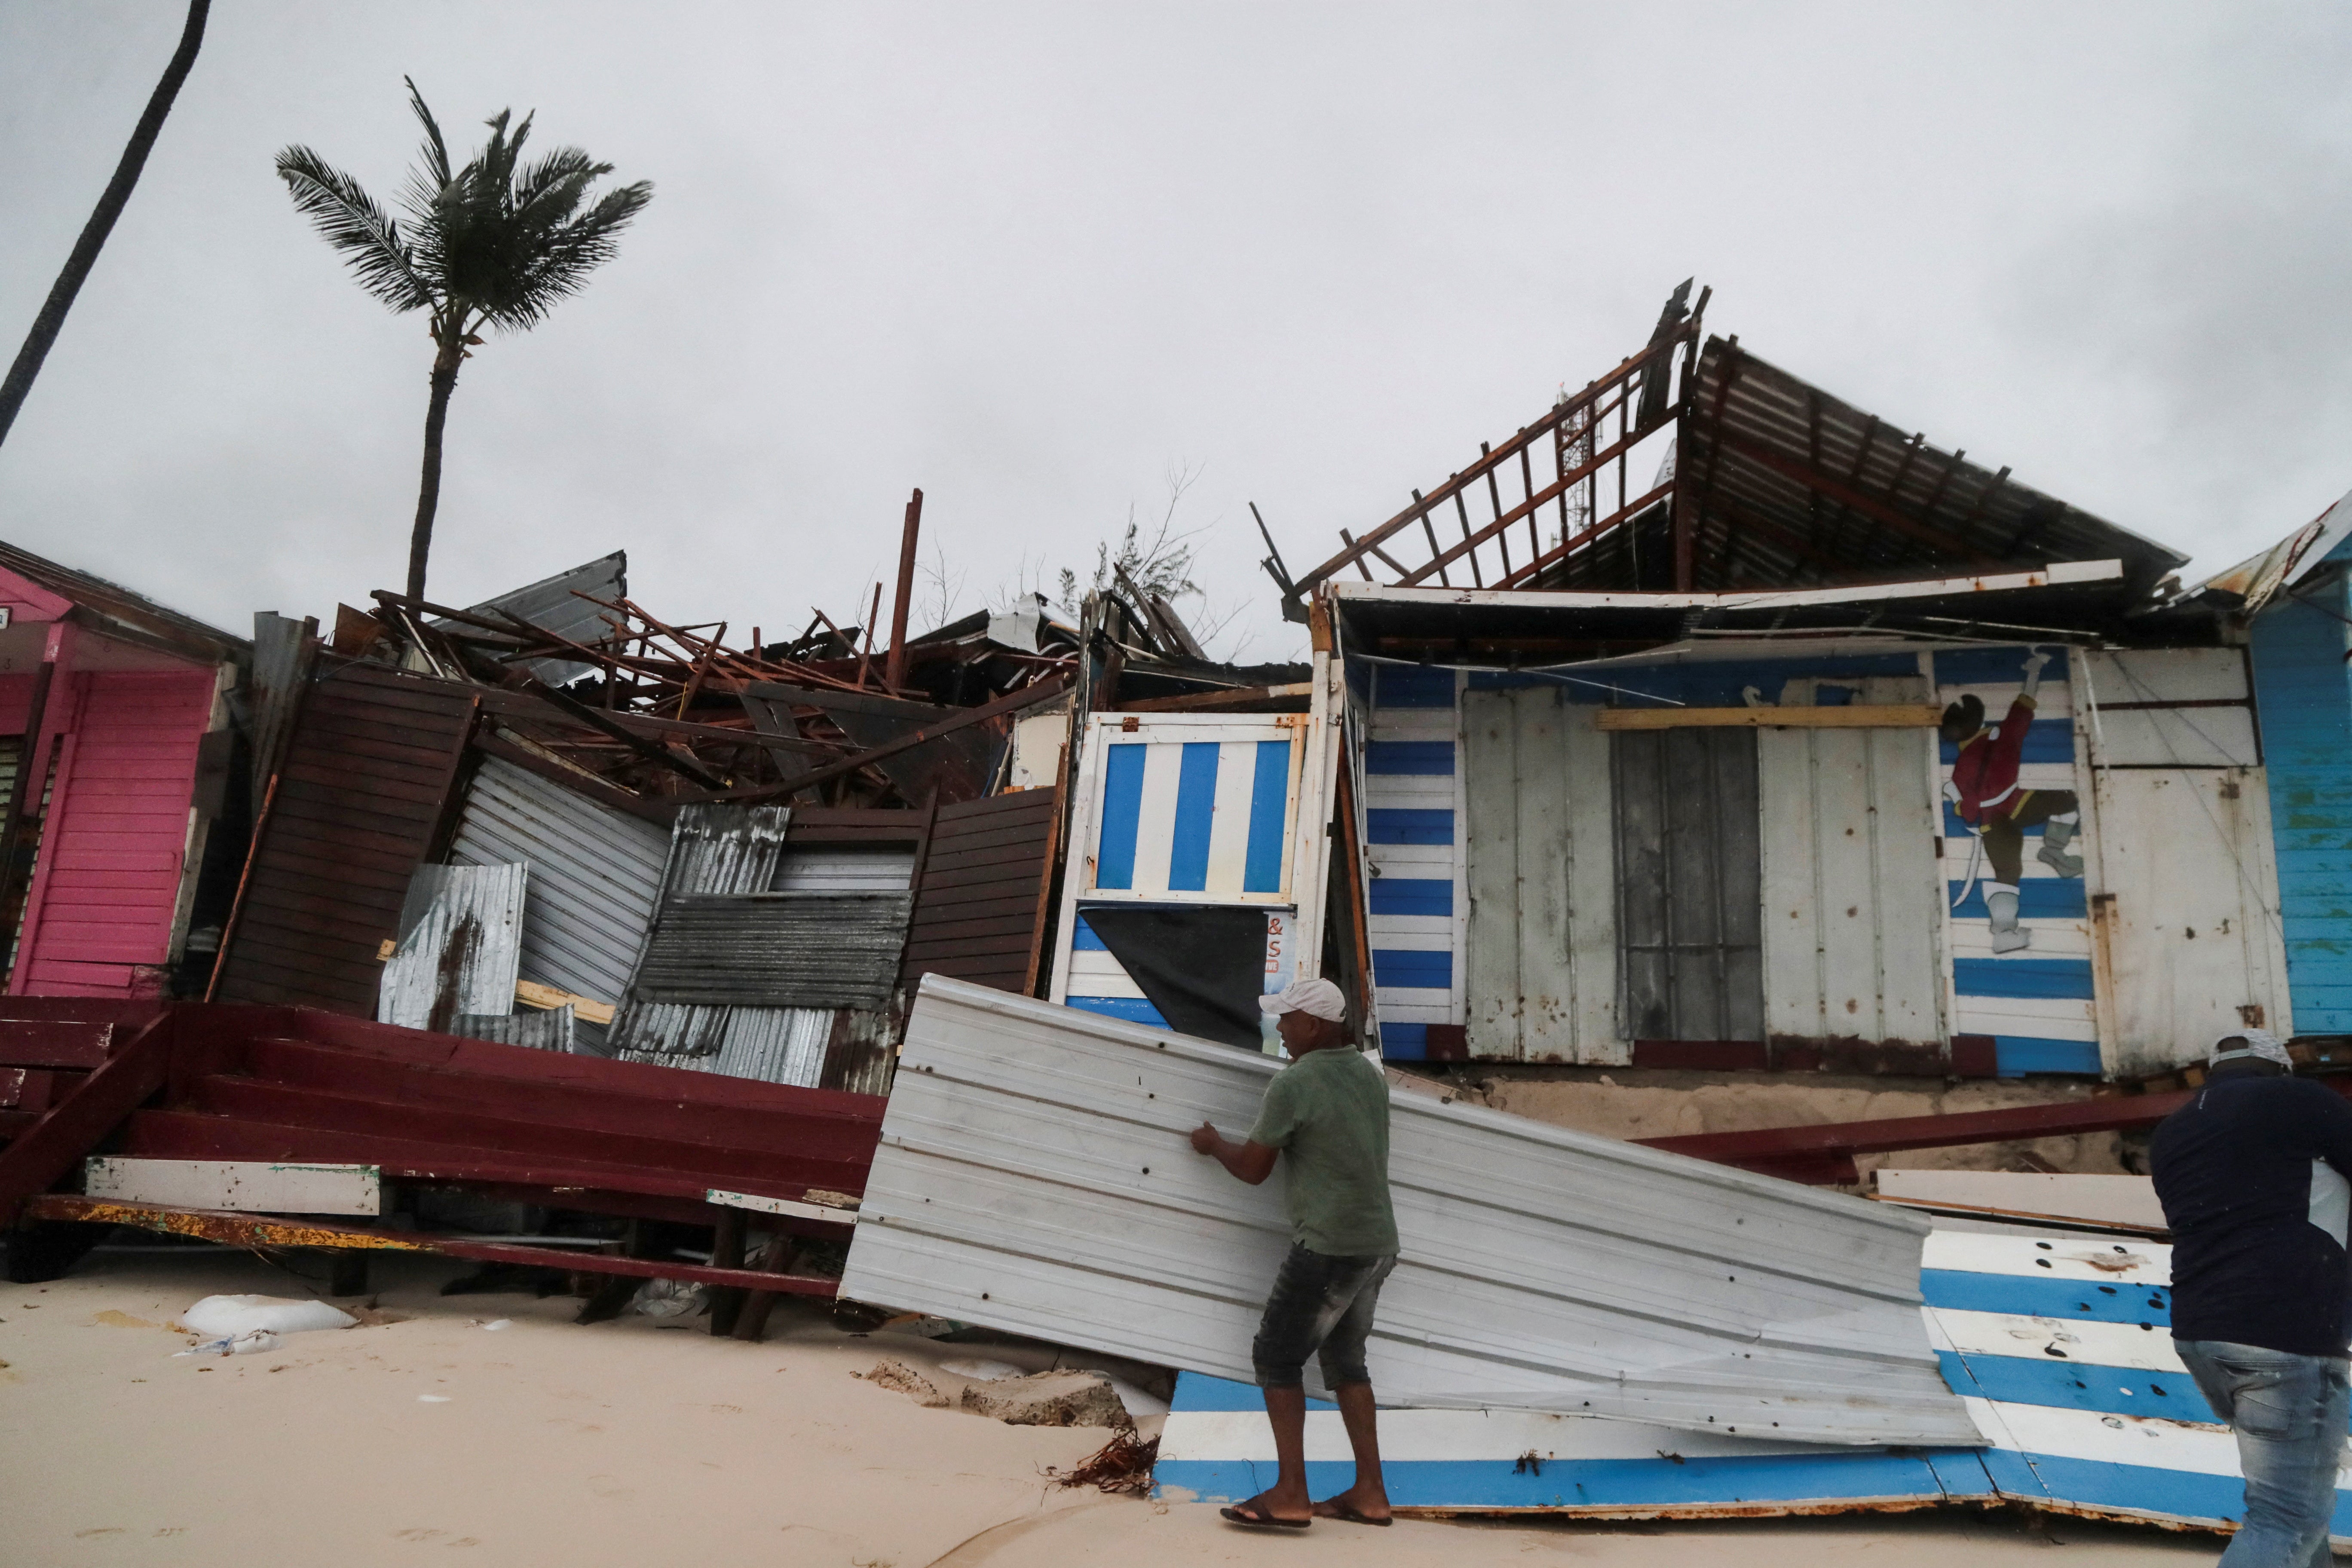 Damaged buildings near the shore in Punta Cana, Dominican Republic